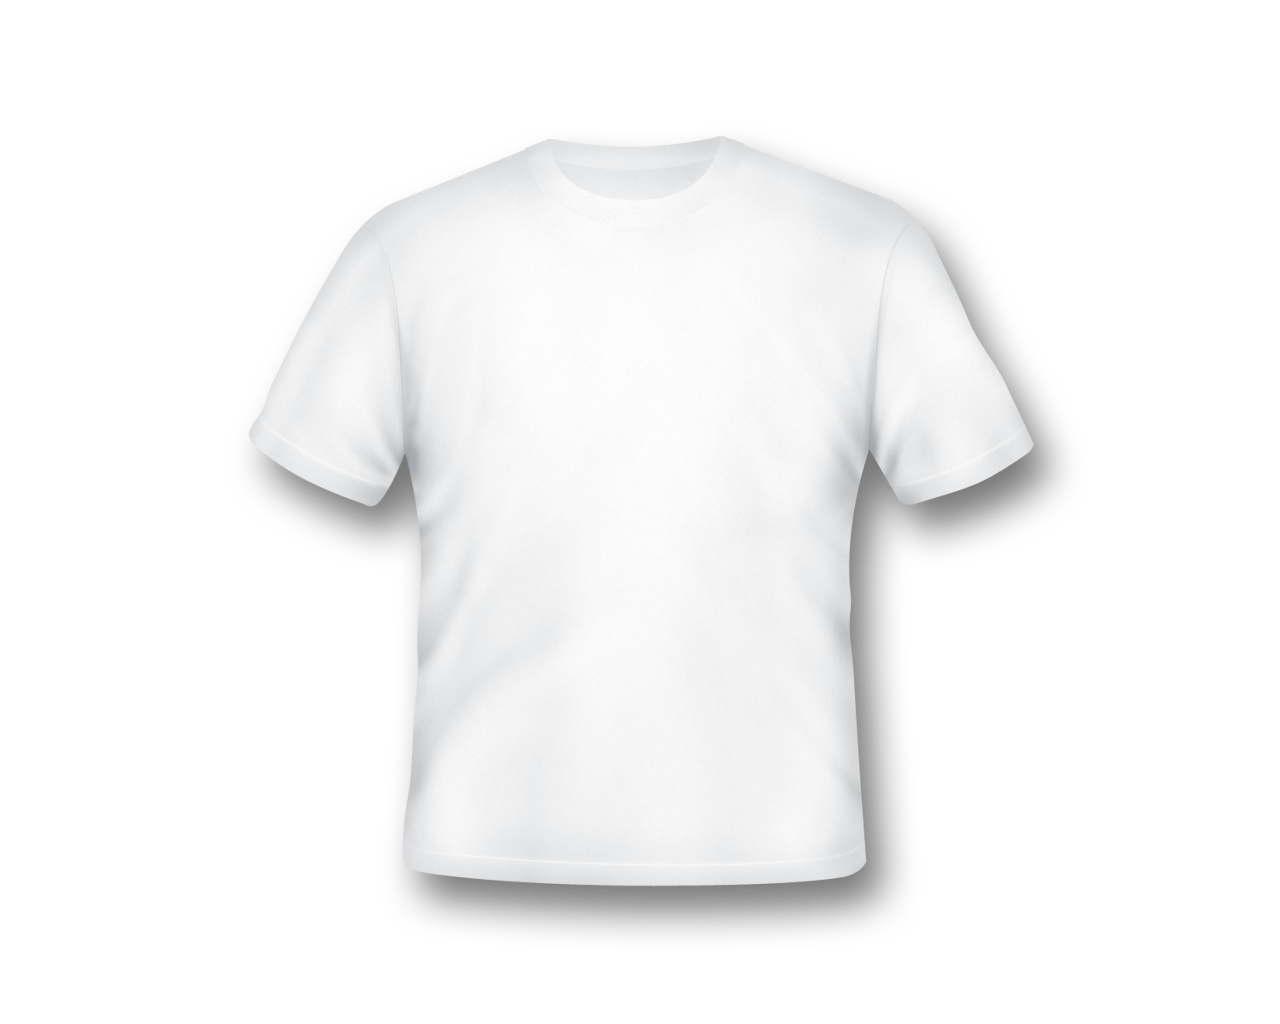 Blank White T Shirt Rated The 20 Best White TShirts on Amazon Who